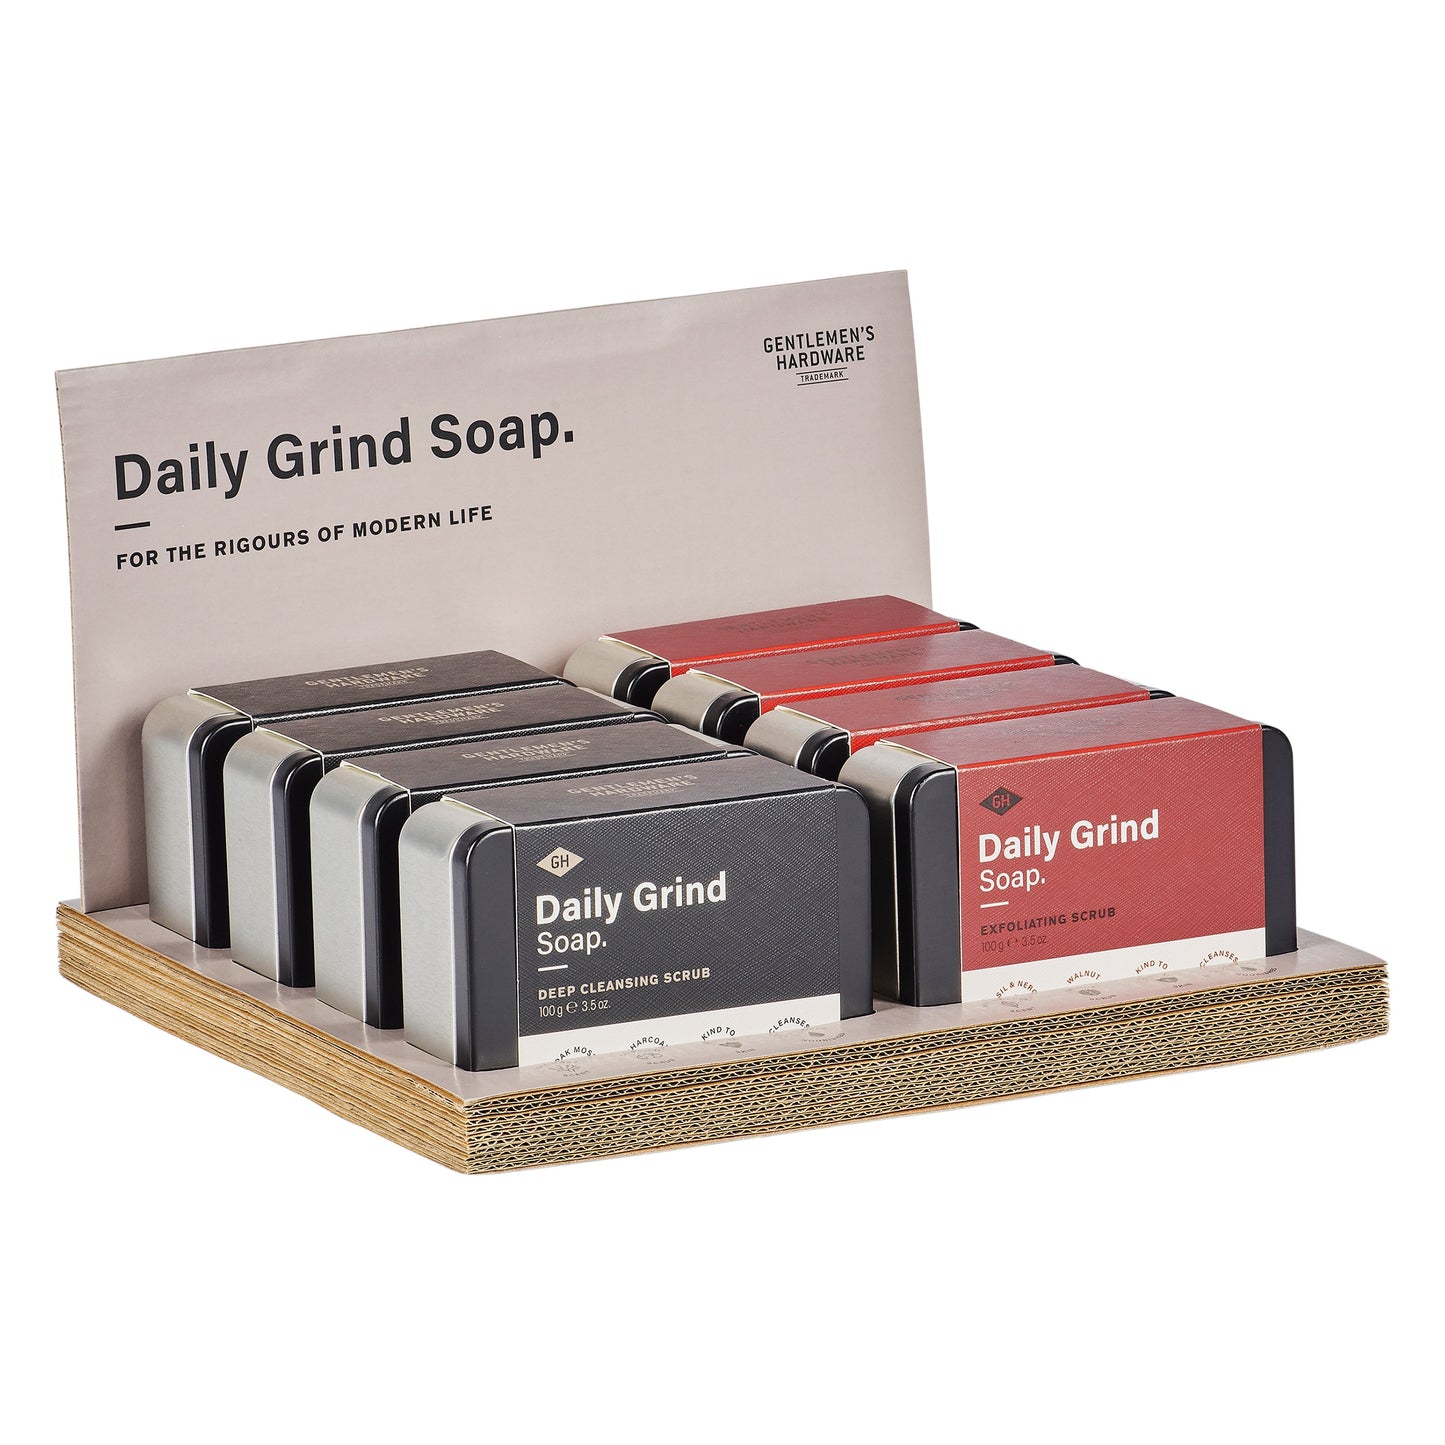 Daily Grind Soaps - Mixed CDU of 8